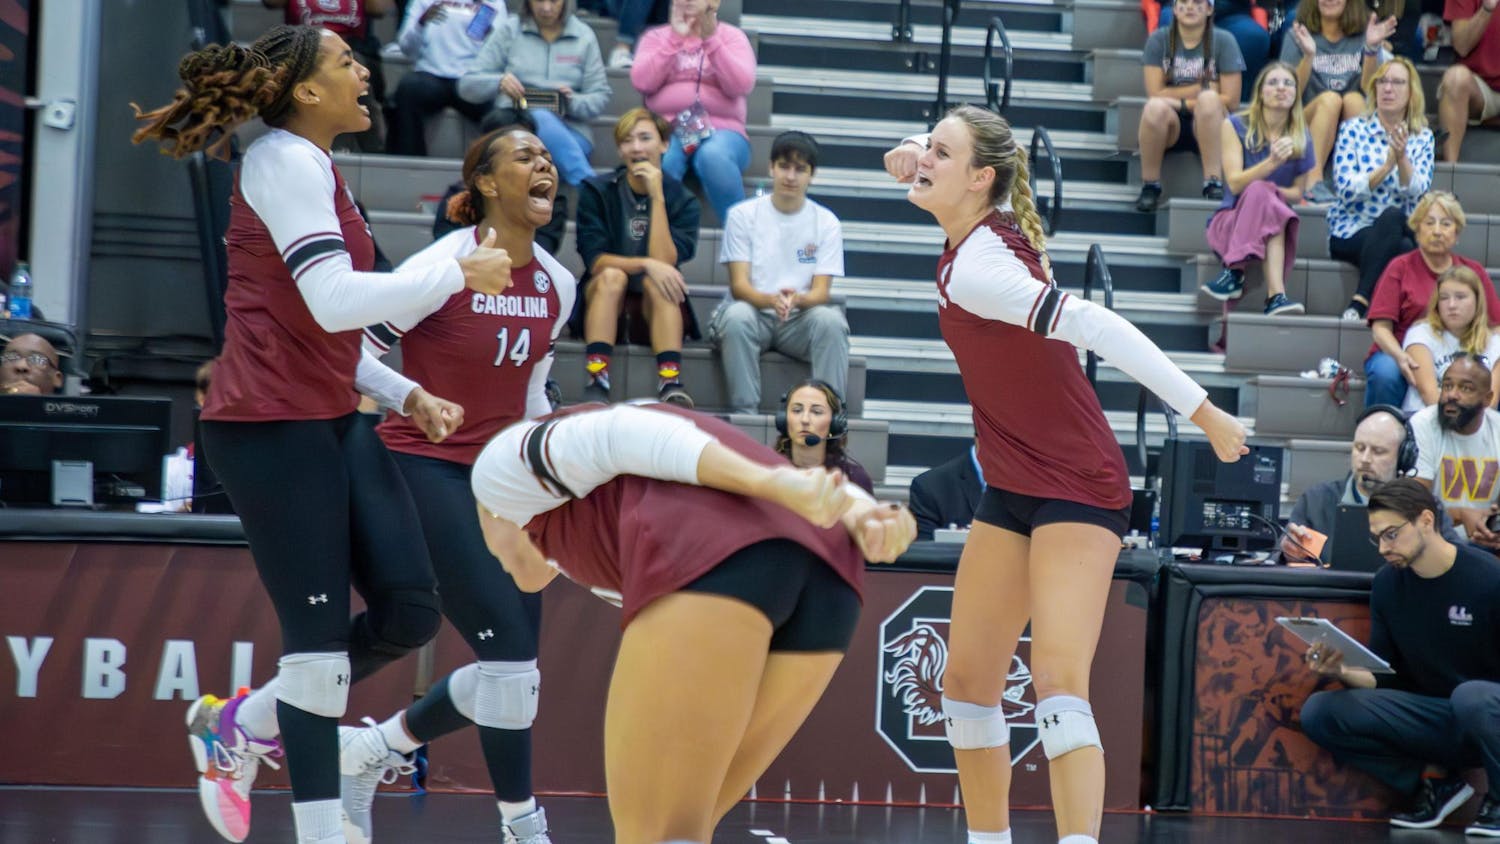 Senior opposite hitter Kiune Fletcher, junior middle blocker Oby Anadi and junior setter Claire Wilson celebrate after winning the second set 25-19 over Ole Miss on Nov. 5, 2023. The Gamecocks defeated the Rebels in three sets at home on Senior Day.